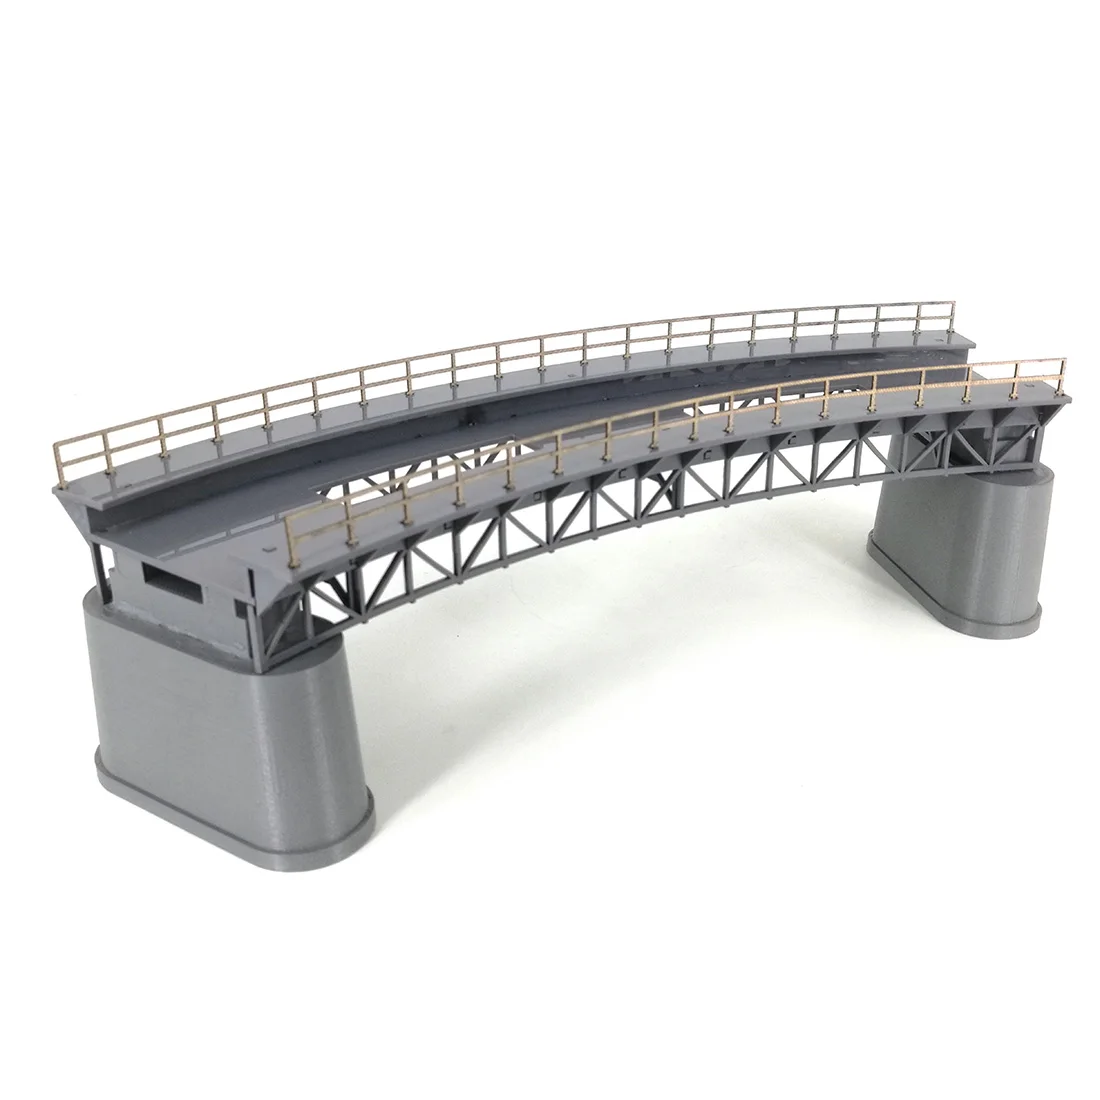 

1:87 HO Scale Train Railway Scene Decoration Q4 R1 Curved Railway Bridge Model without Pier for Sand Table